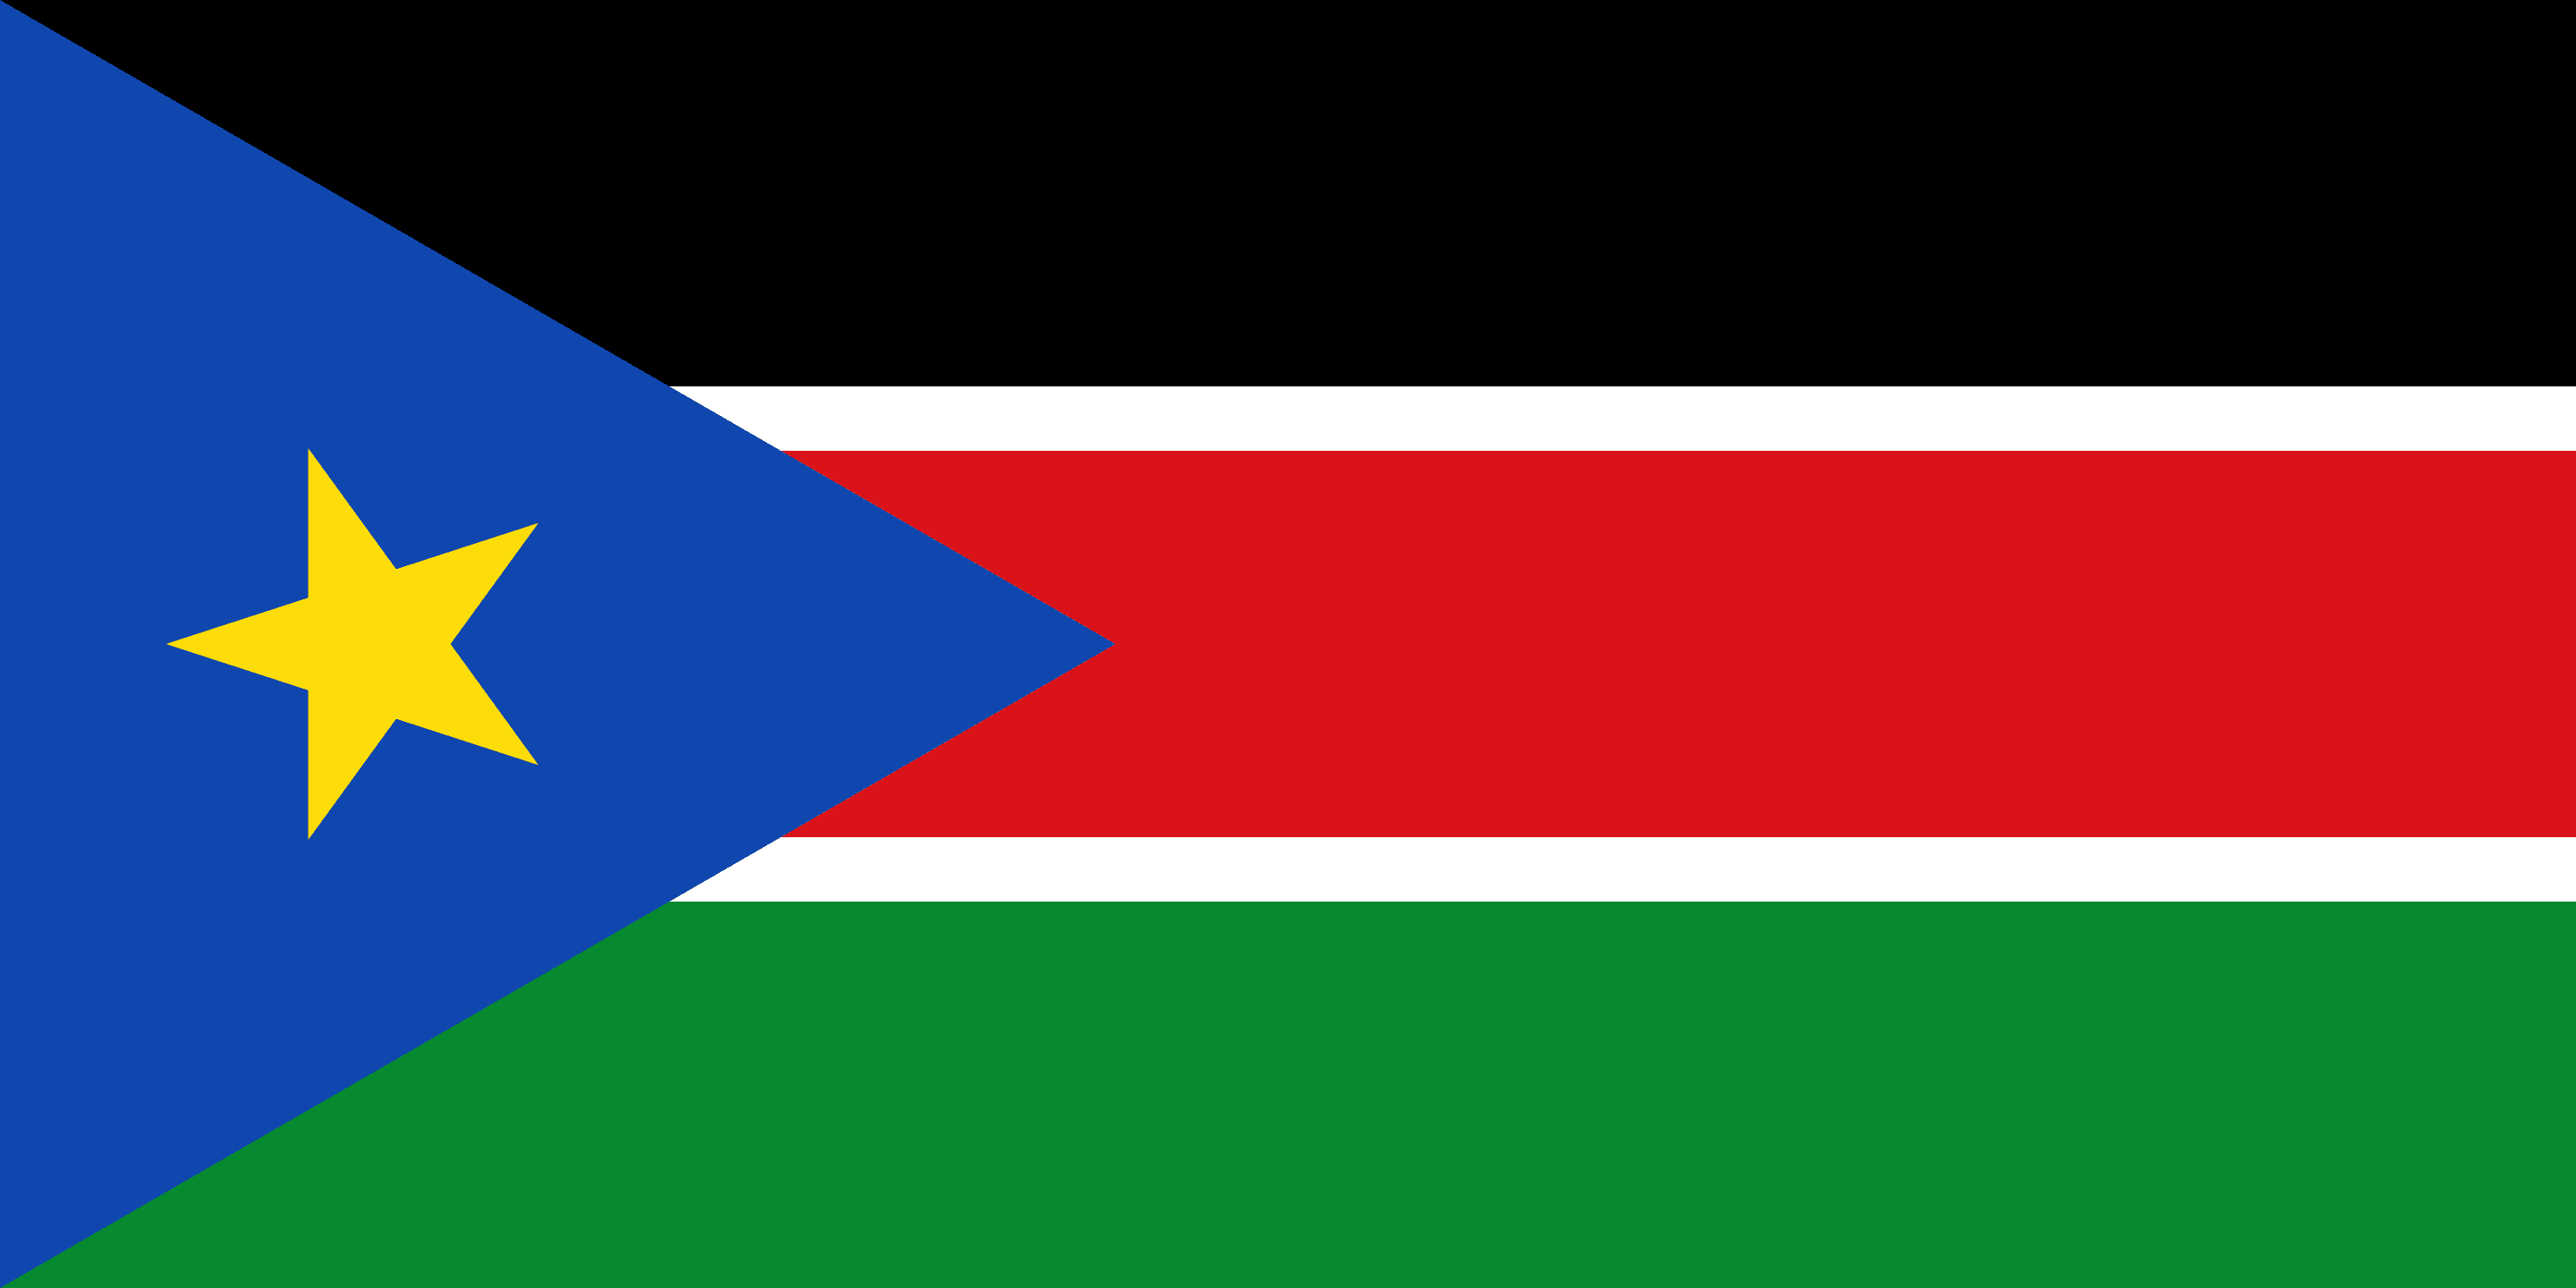 Facts of South Sudan